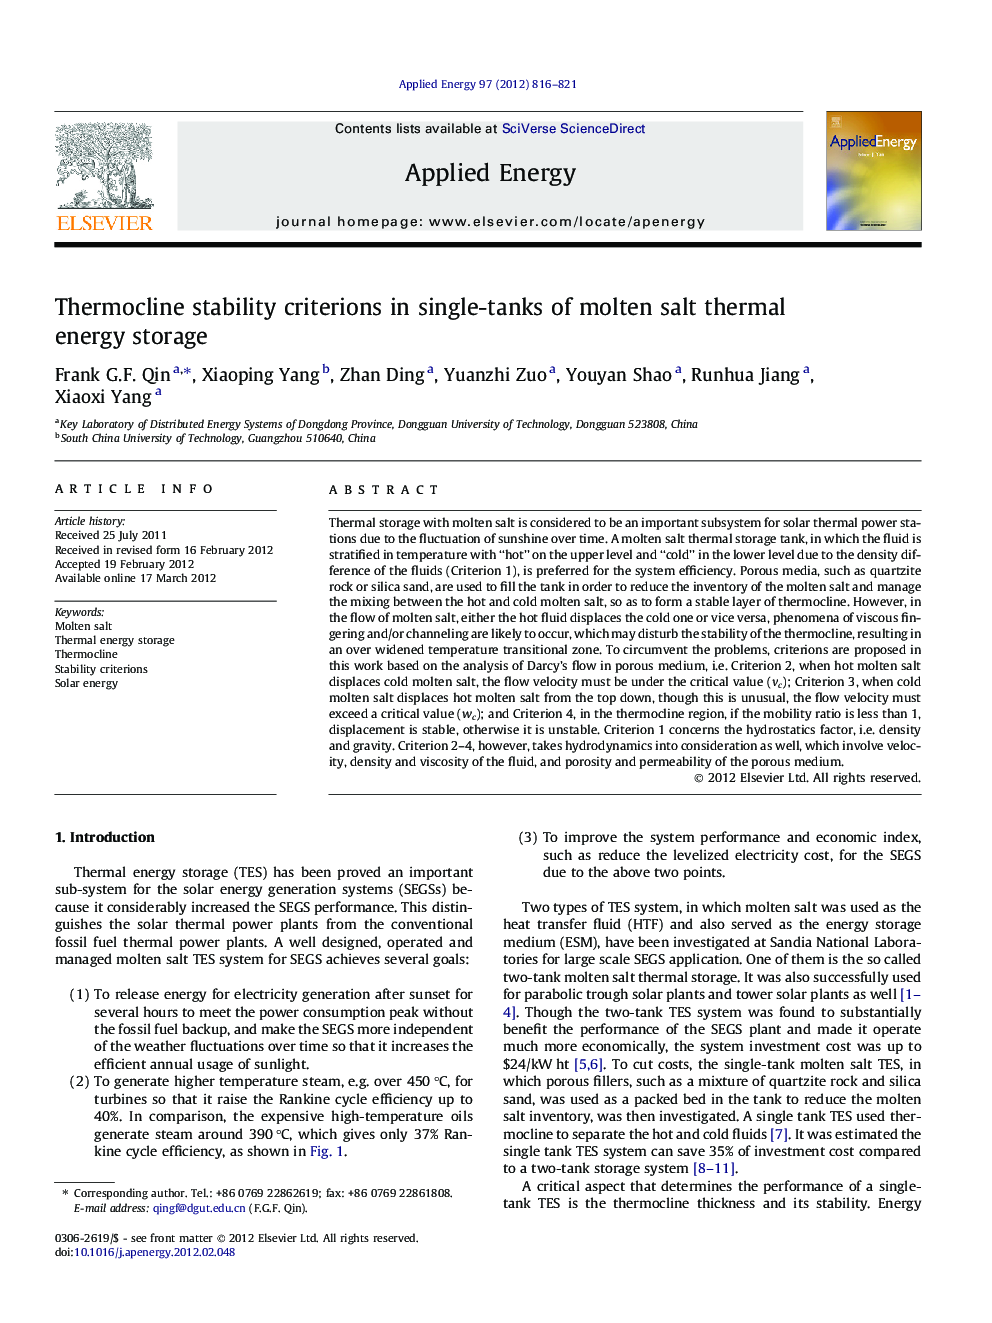 Thermocline stability criterions in single-tanks of molten salt thermal energy storage